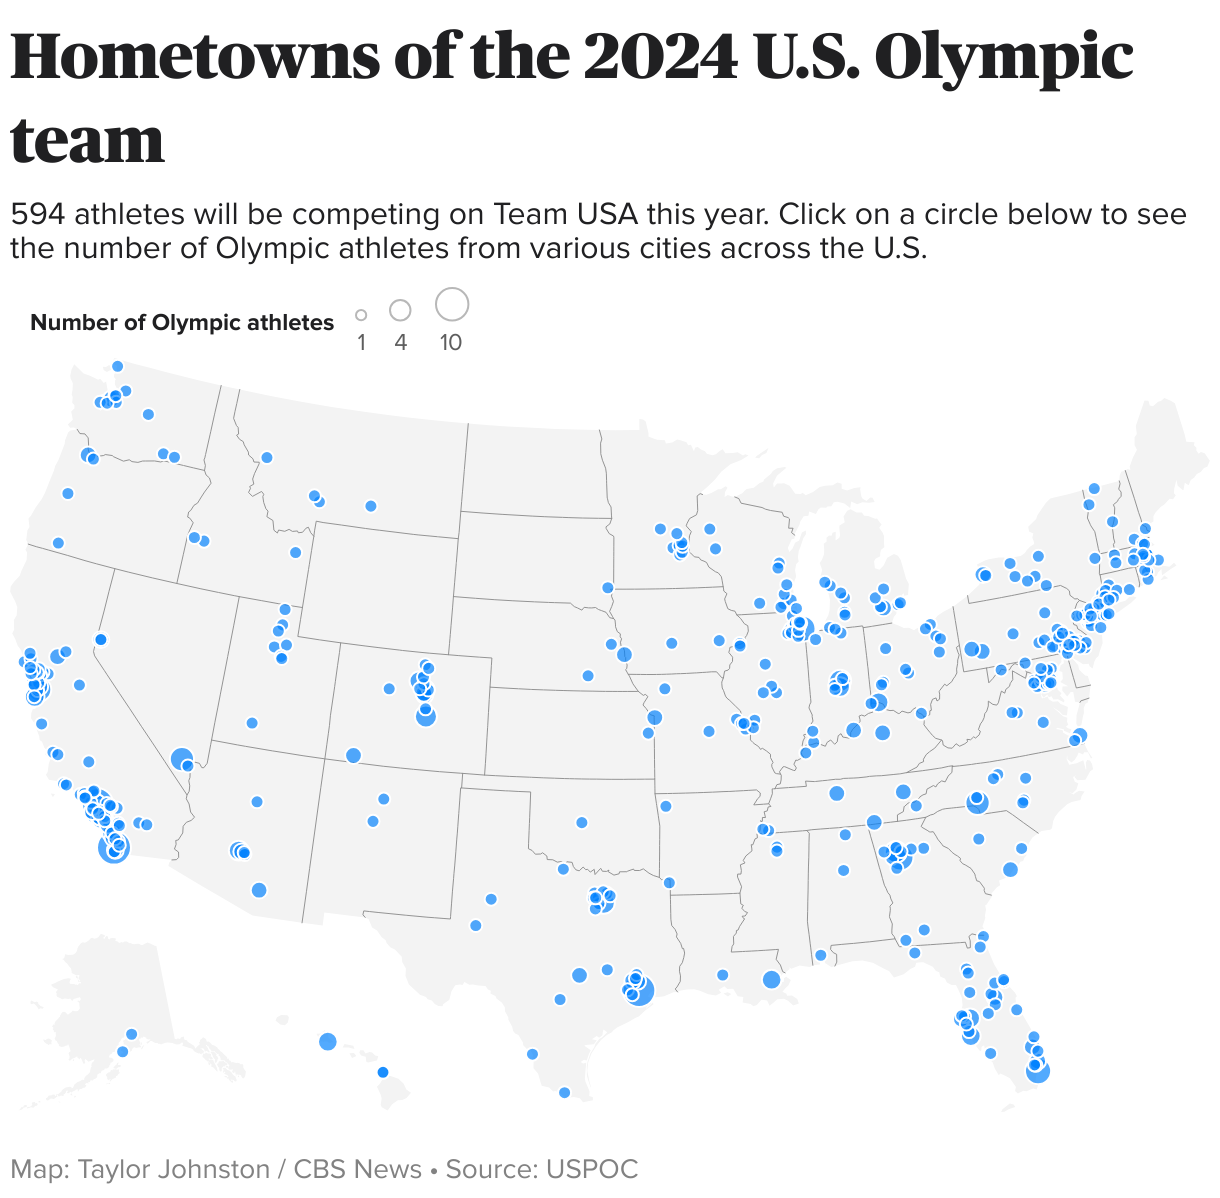 Symbol map showing hometowns of the 2024 U.S. Olympic team.